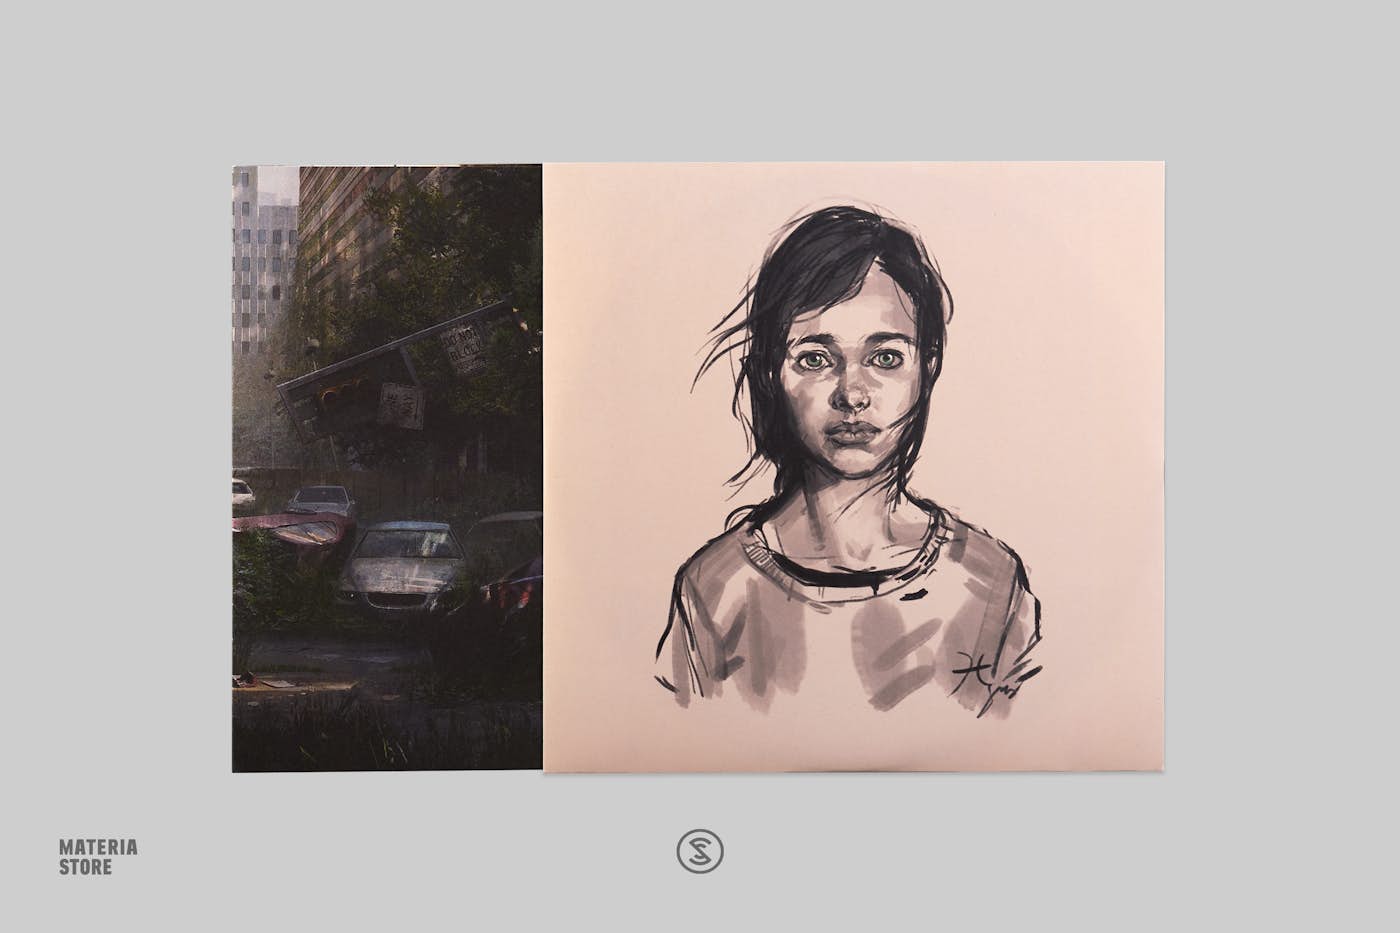 The Last of Us 2, artwork, video games